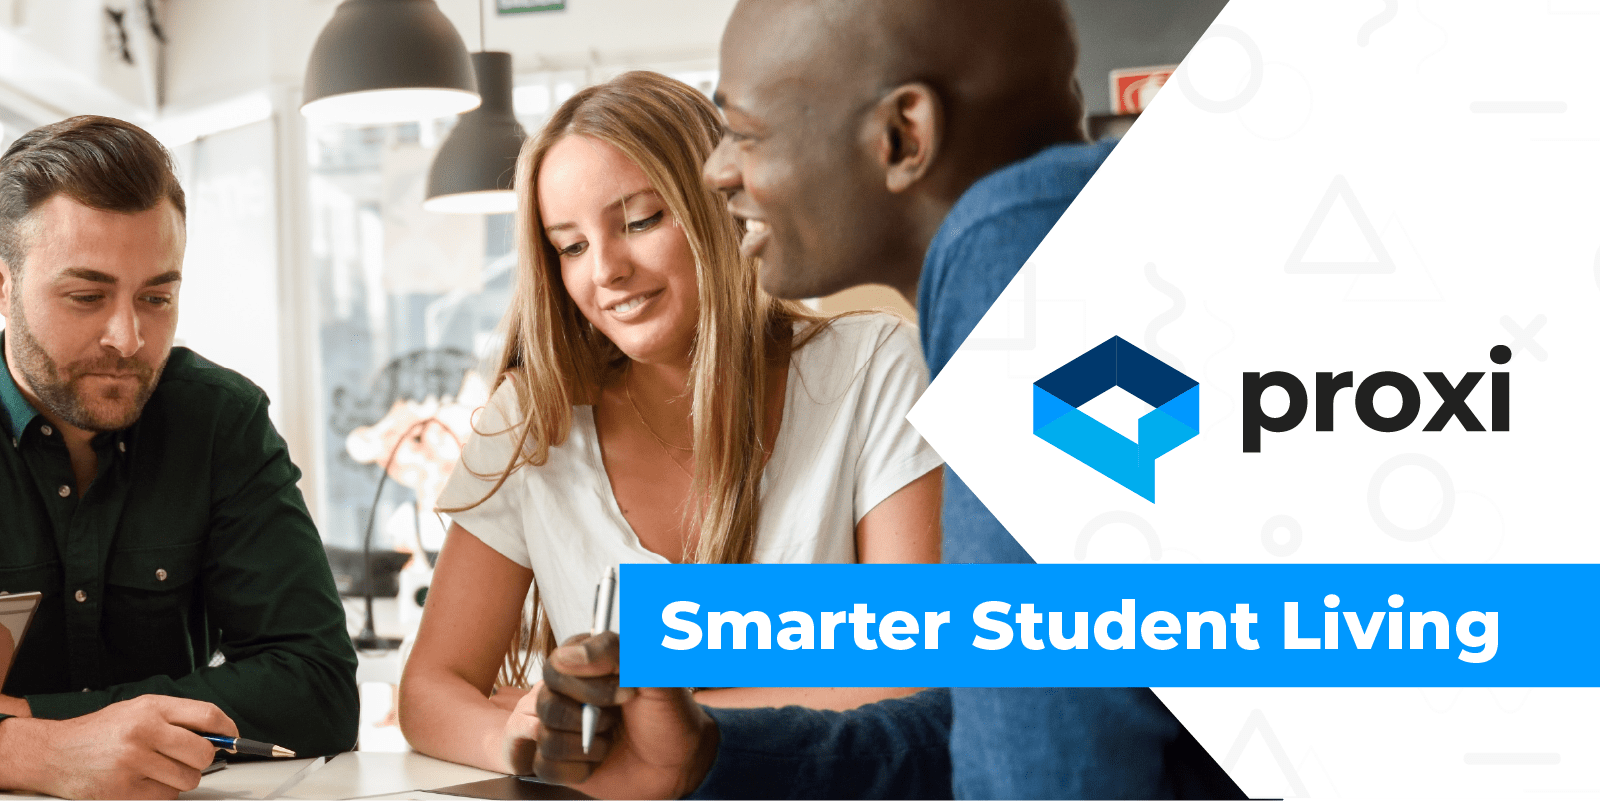 Life by Proxi - Smarter Student Living